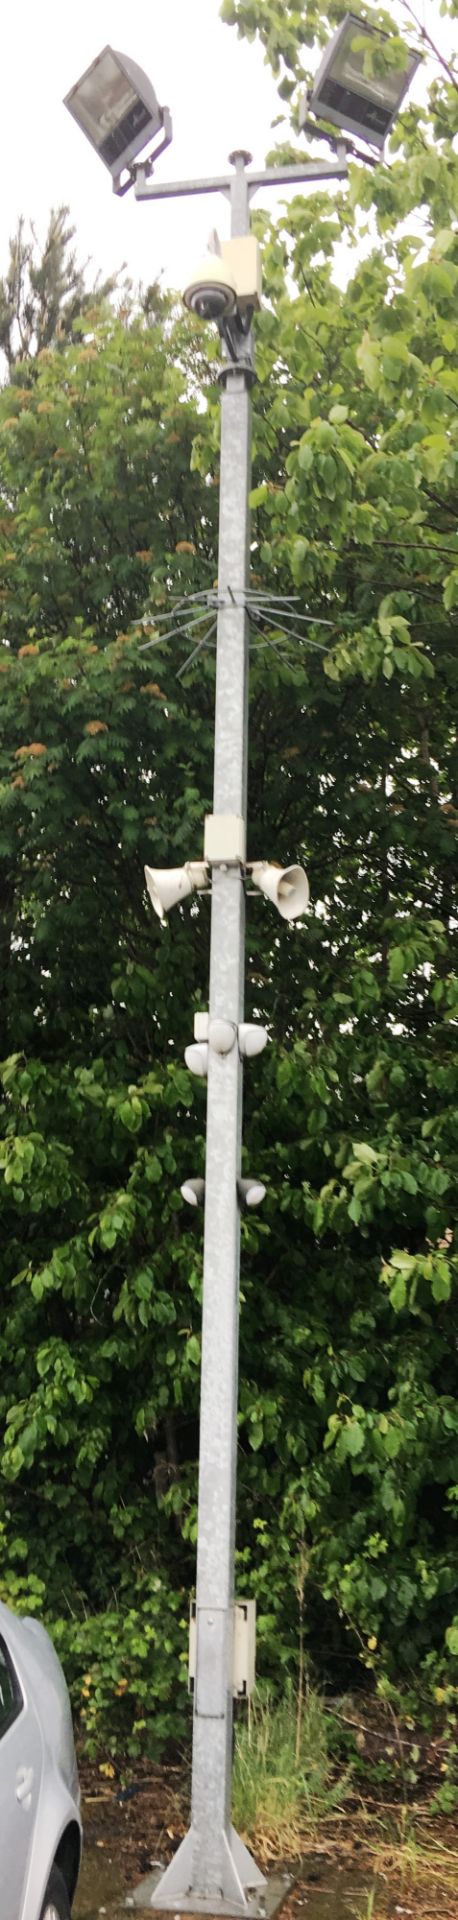 1 x galvanized 6m fixed column security post with 2 floodlights, 2 smaller halogen floodlights,